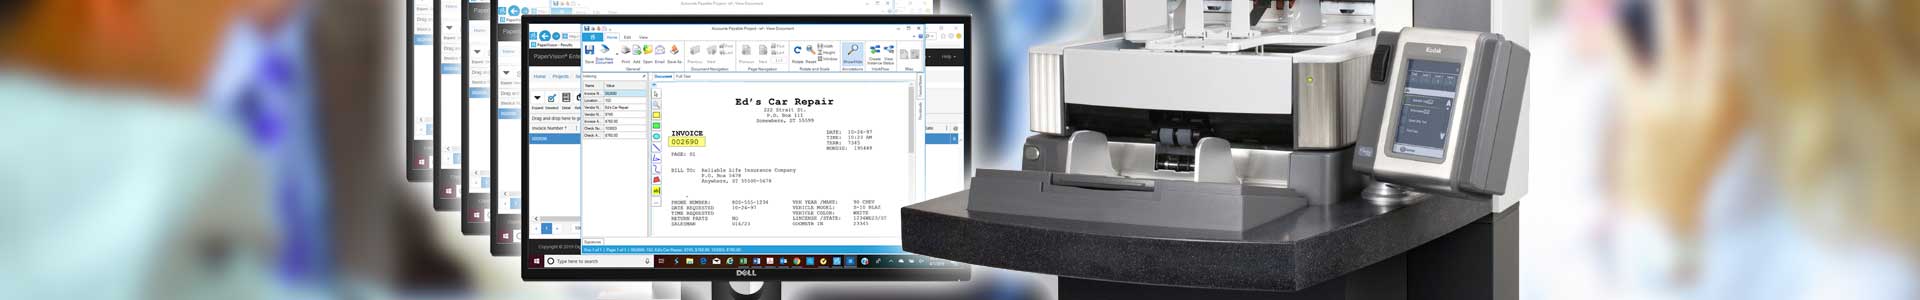 Document Management Systems, Scanners and Software